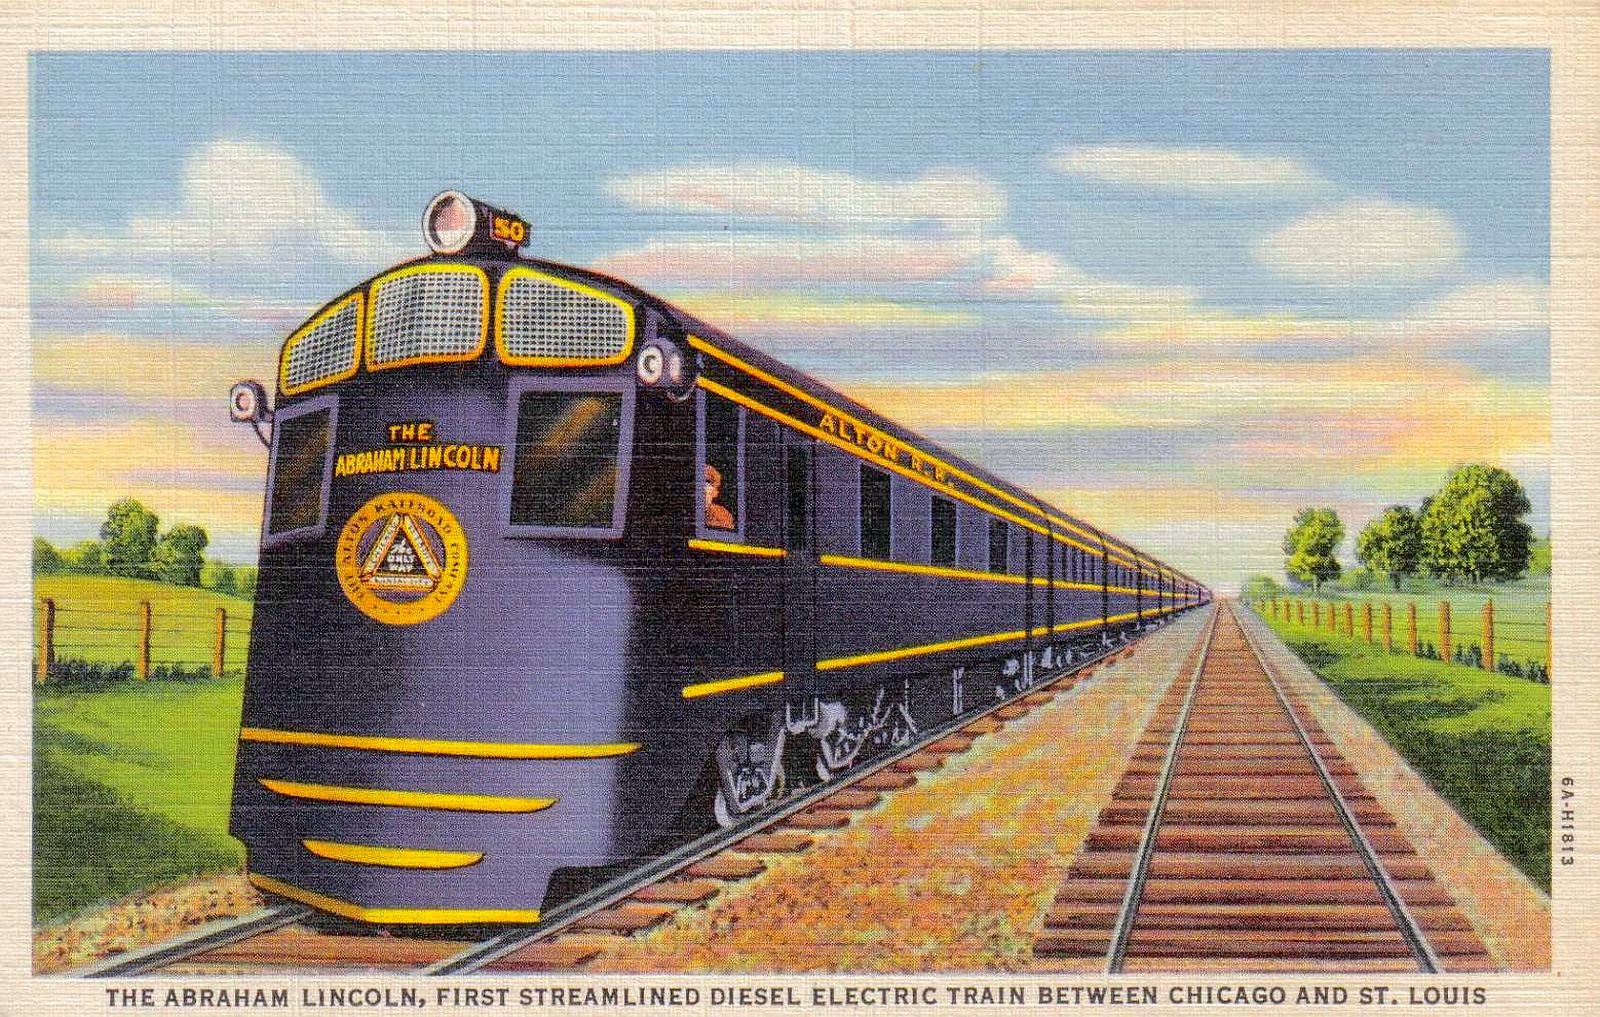 transpress nz: the &#39;Abraham Lincoln&#39; train between Chicago and St Louis, 1936